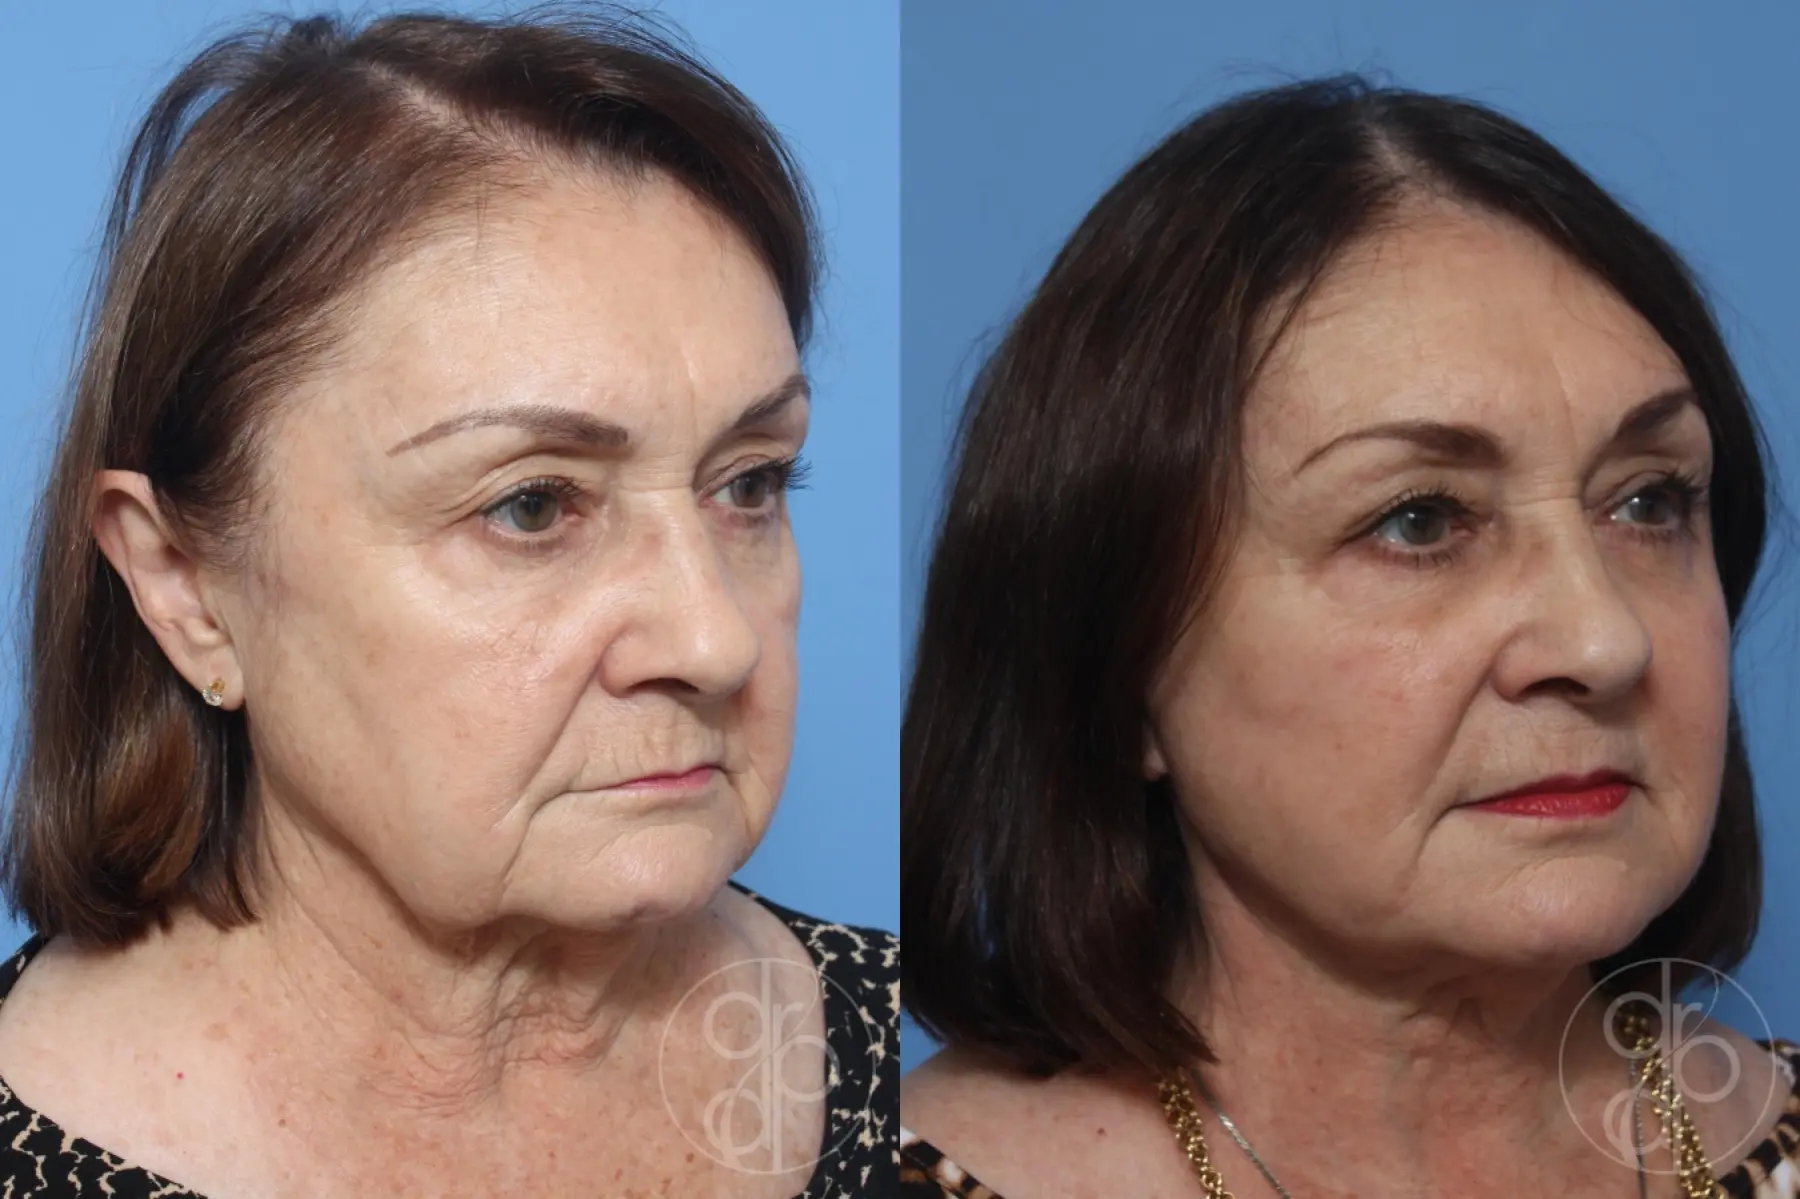 patient 12406 facelift before and after result - Before and After 3